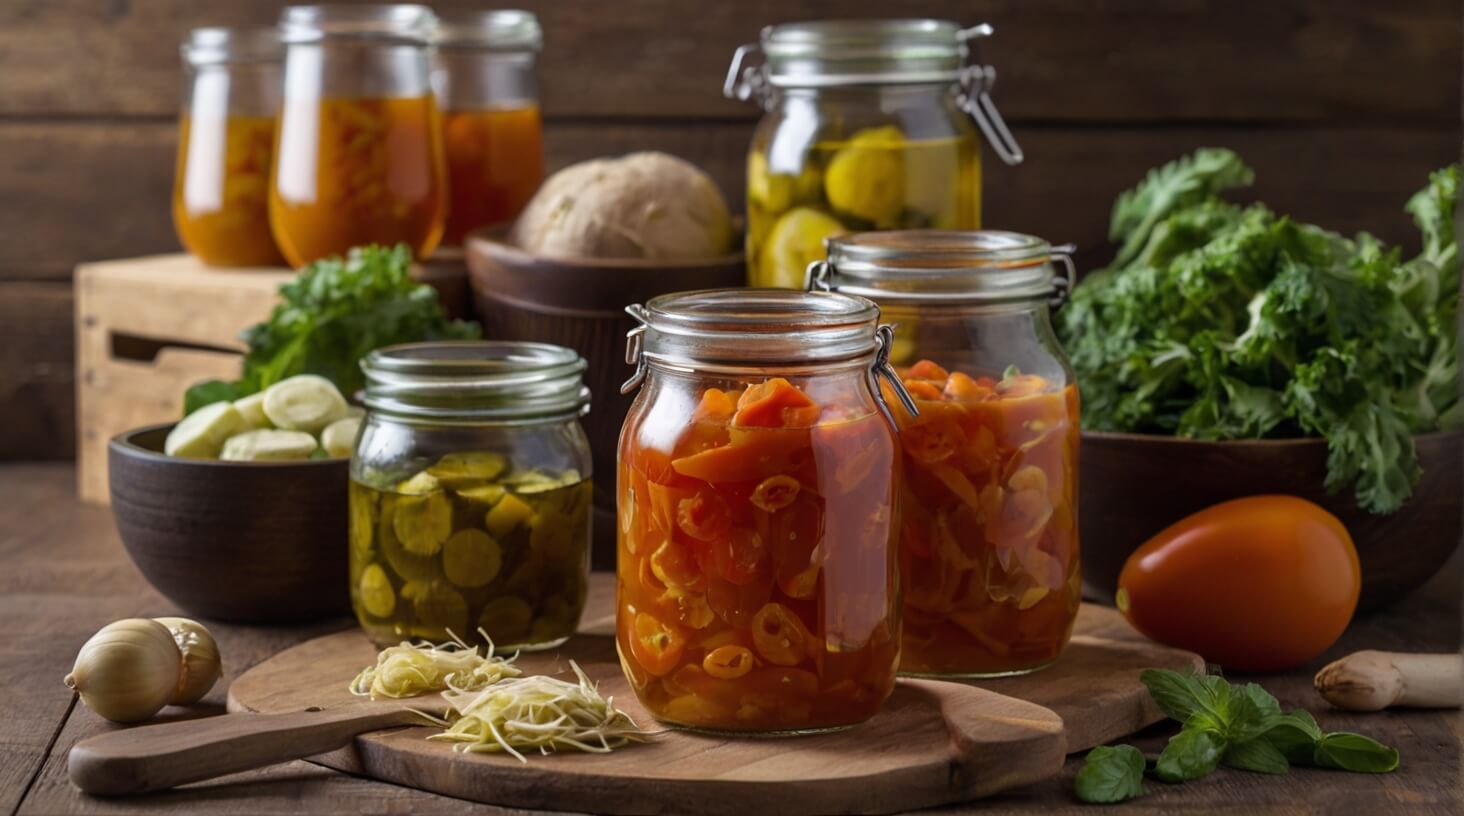 A variety of fermented foods including kimchi, sauerkraut, and kombucha arranged on a wooden table, representing ways to incorporate fermented foods into your diet for improved health and wellness.